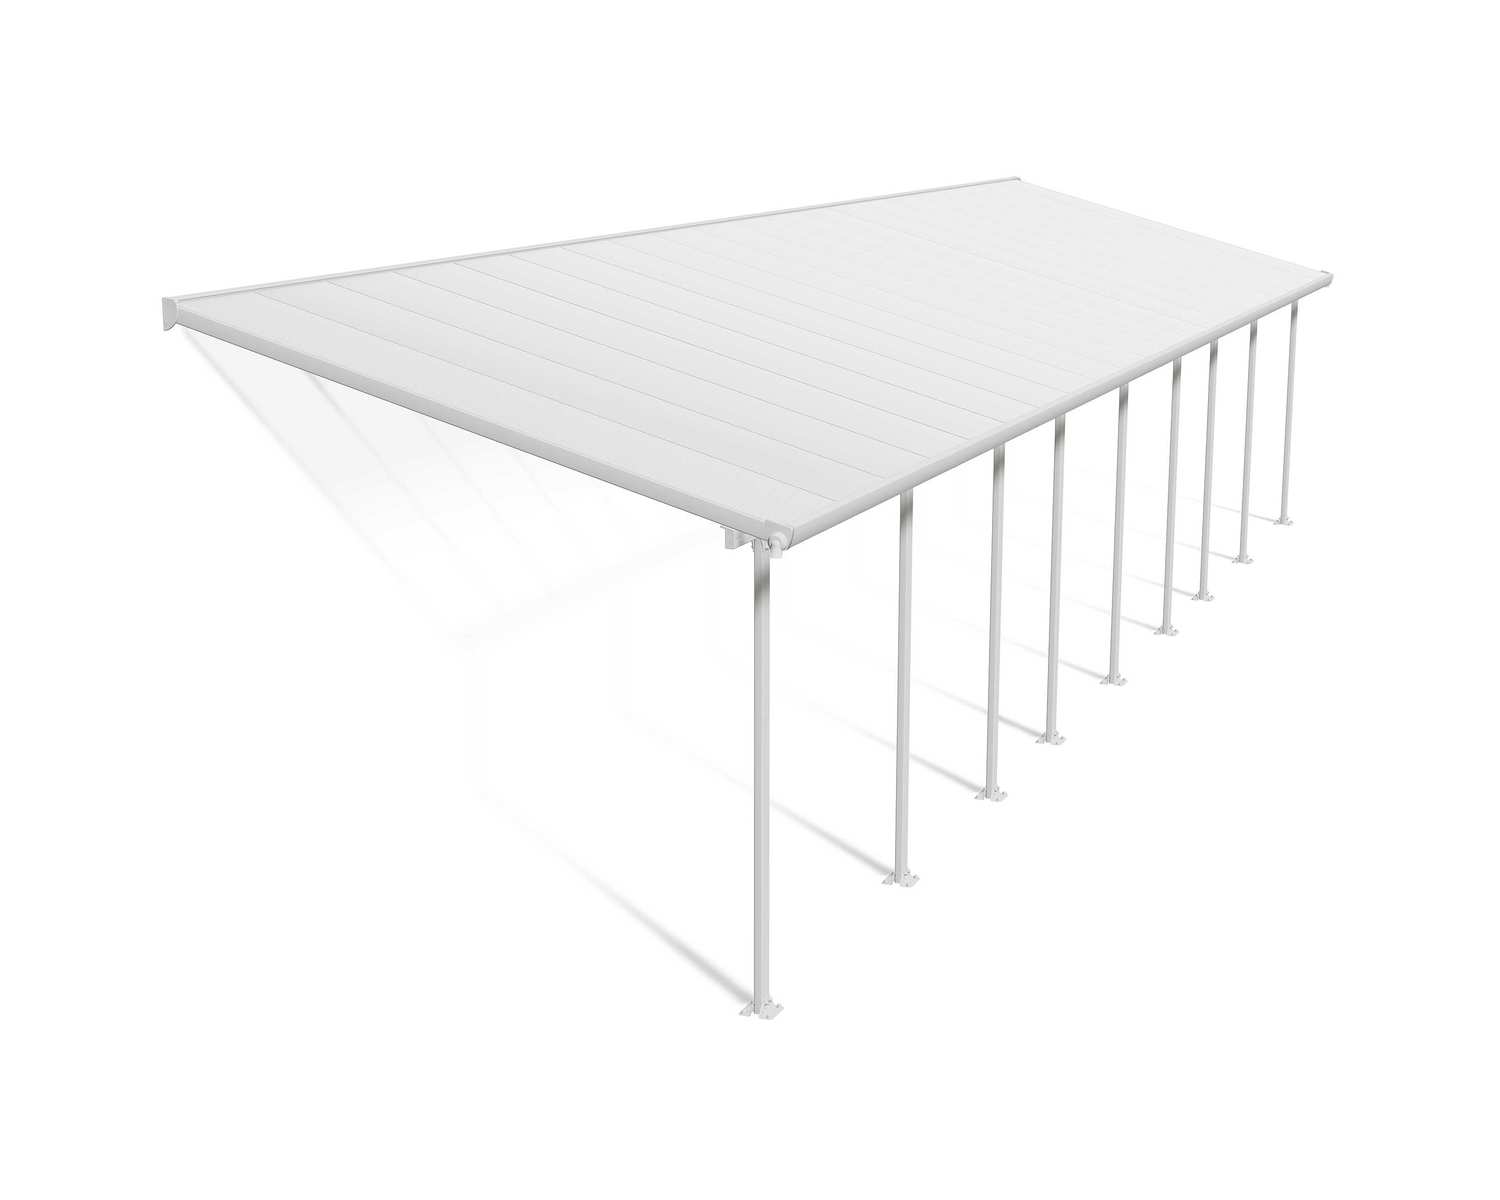 Feria 10 ft. x 42 ft. White Aluminium Patio Cover With 9 Posts, White Twin-Wall Polycarbonate Roof Panels.